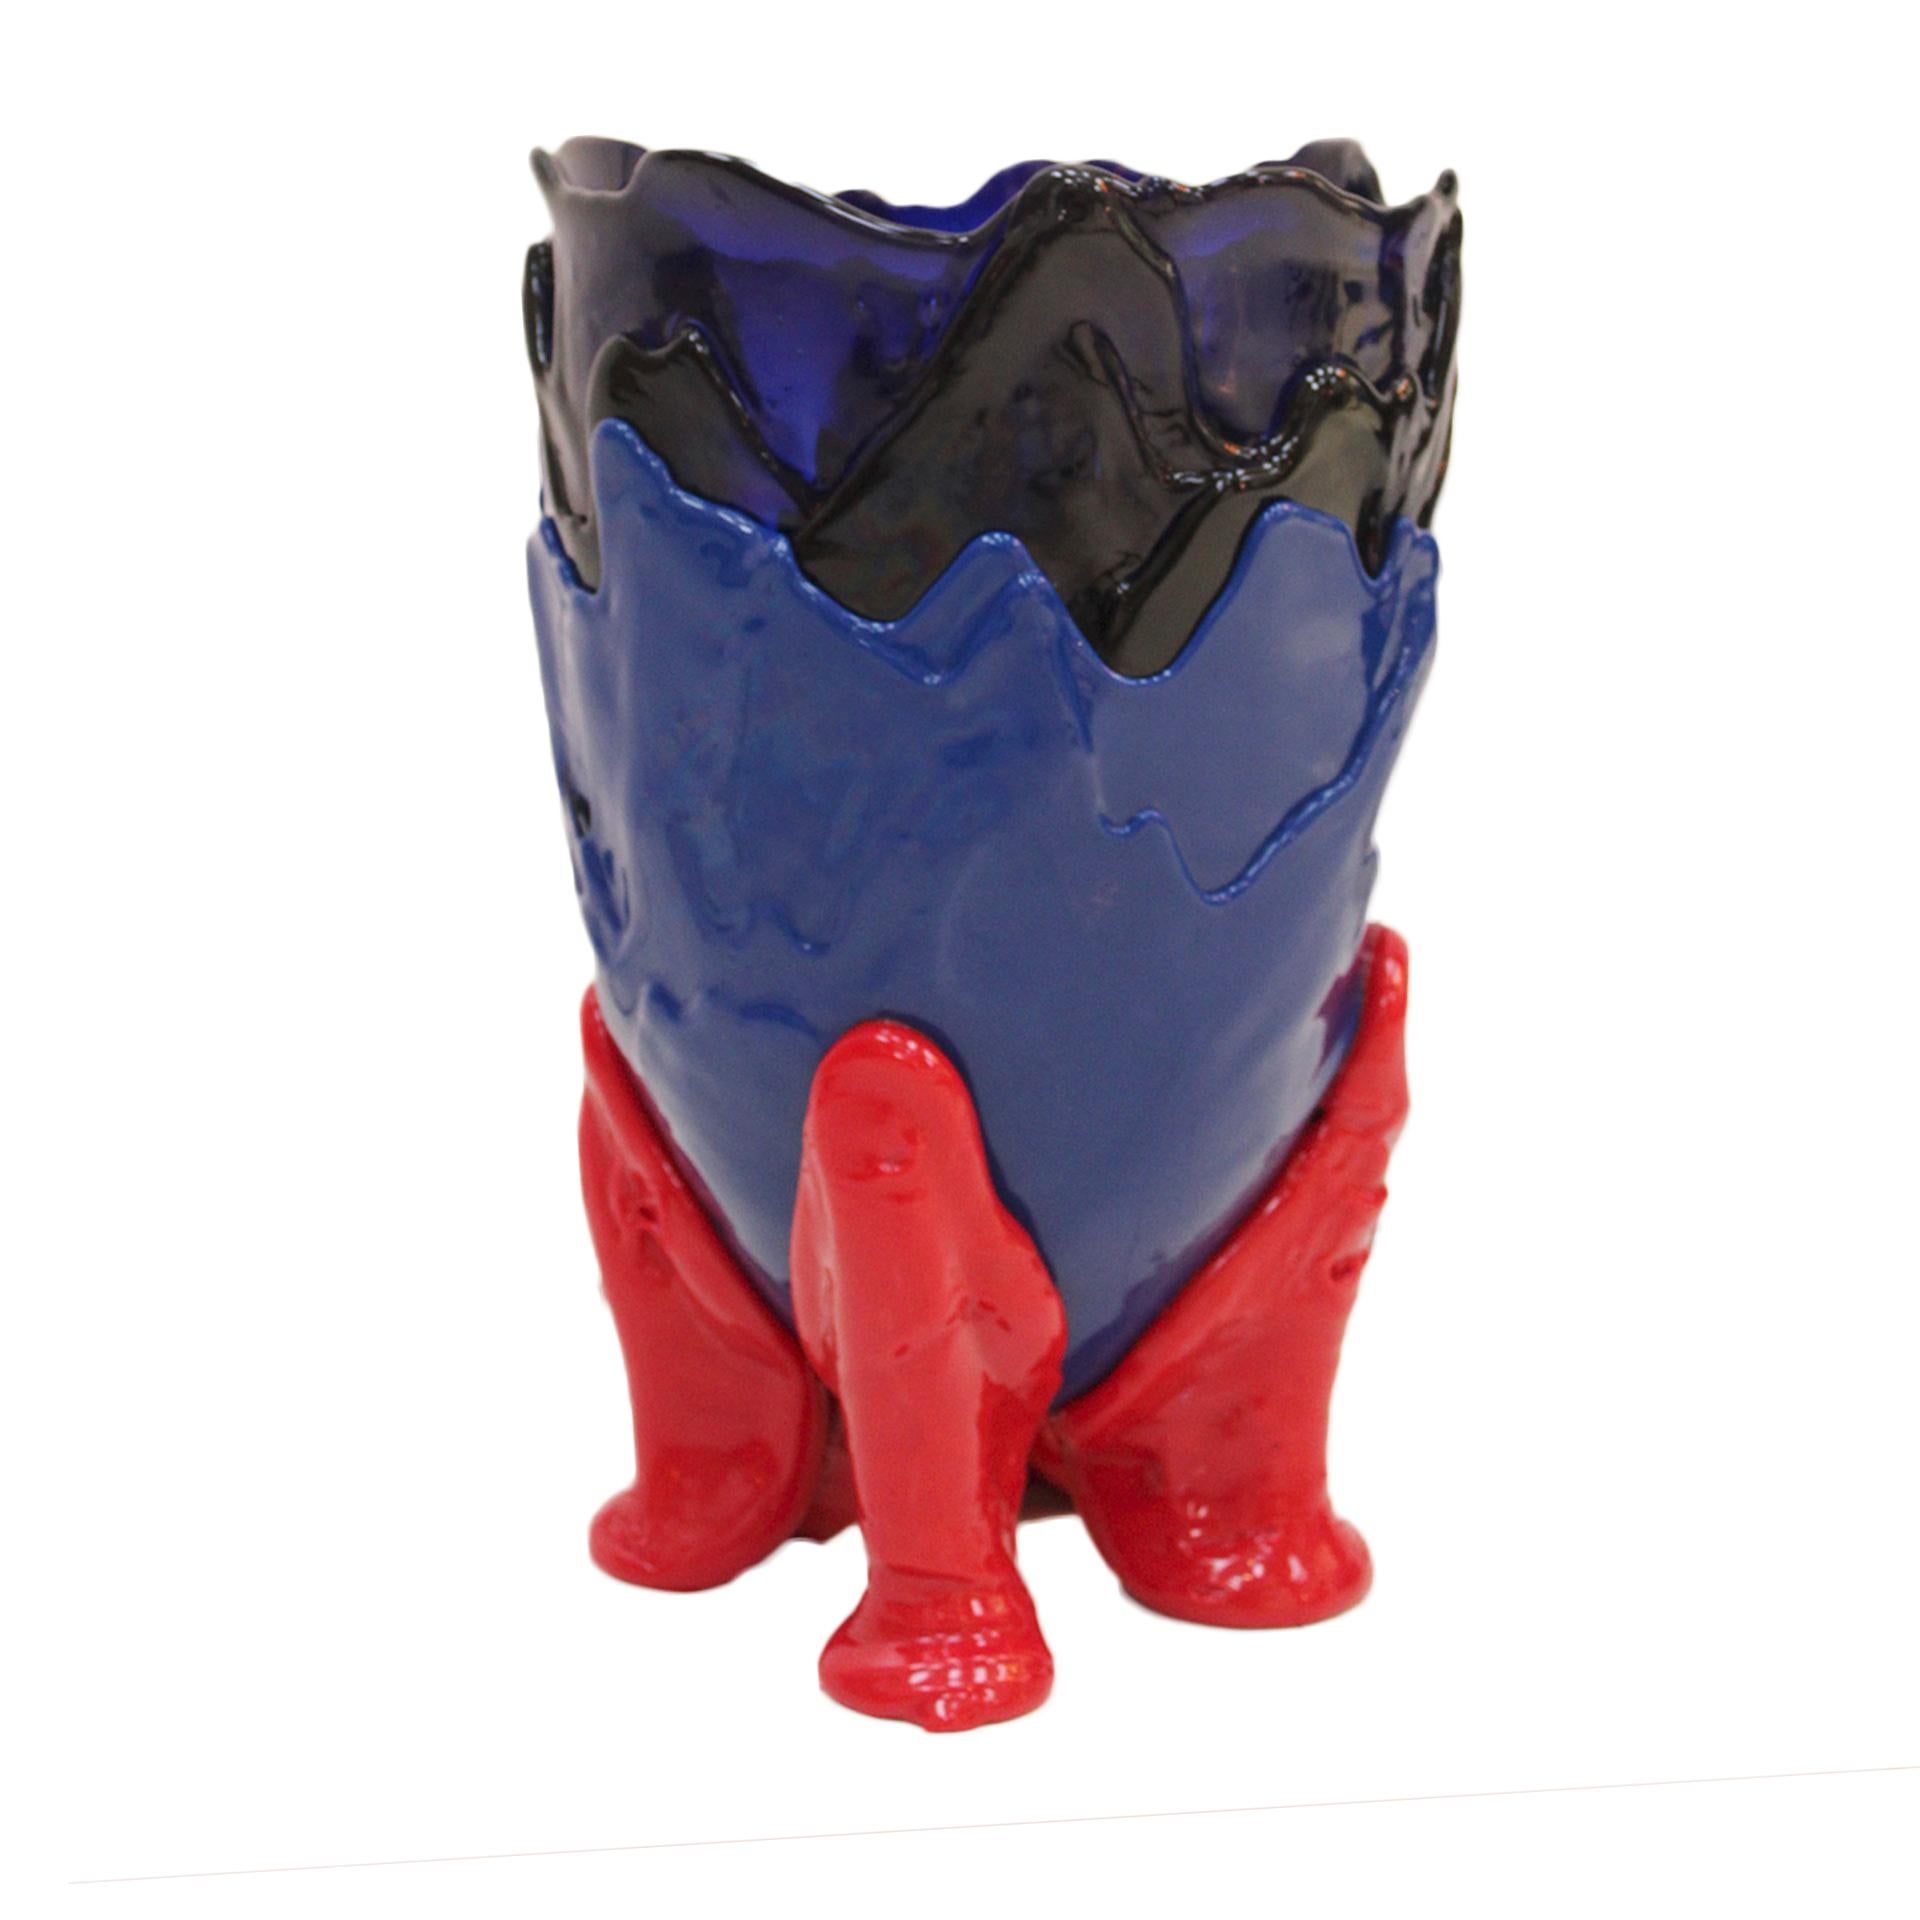 Contemporary vase in blue and red designed by Gaetano Pesce in 1995 and edited by Fish Design. Made of colored soft resin. Unique piece.